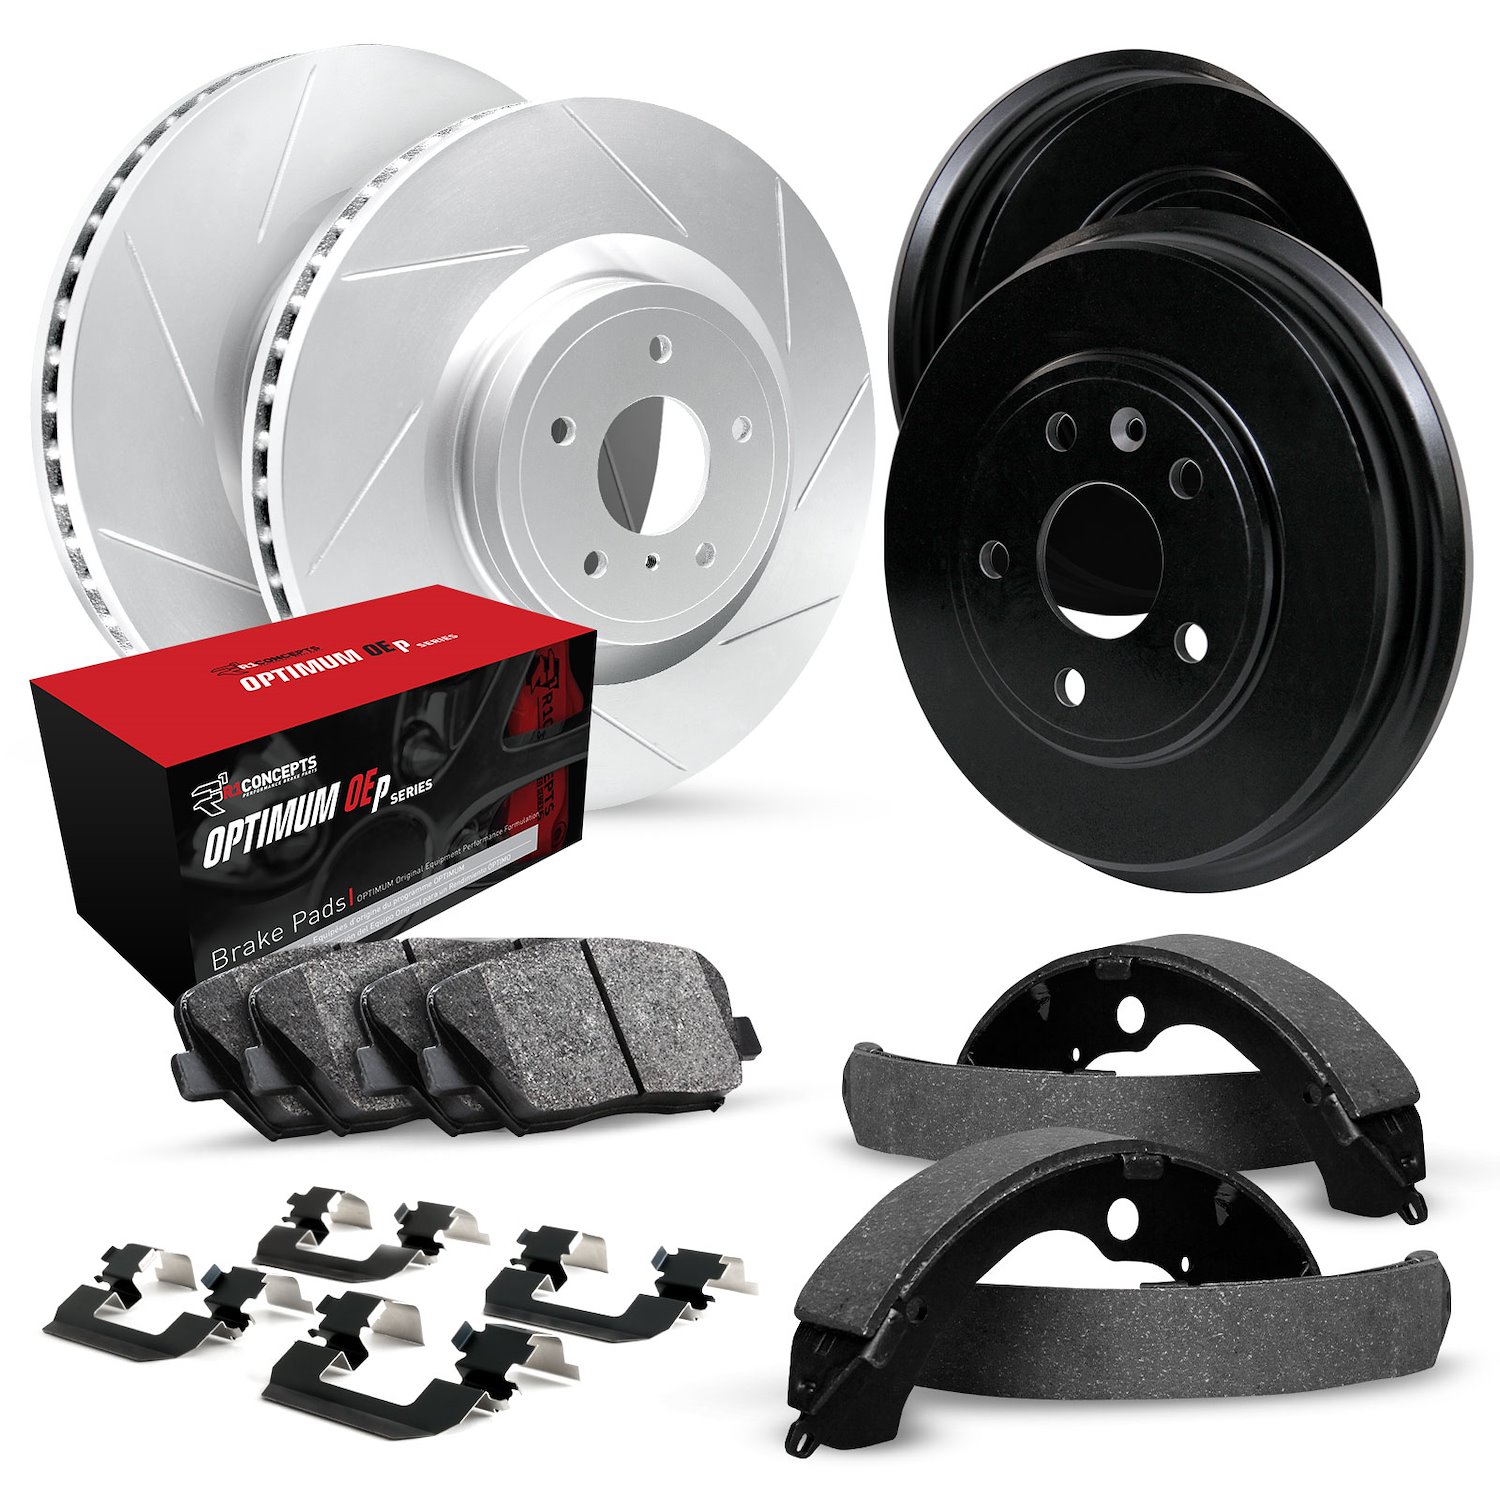 GEO-Carbon Slotted Brake Rotor & Drum Set w/Optimum OE Pads, Shoes, & Hardware, 1995-1999 Ford/Lincoln/Mercury/Mazda